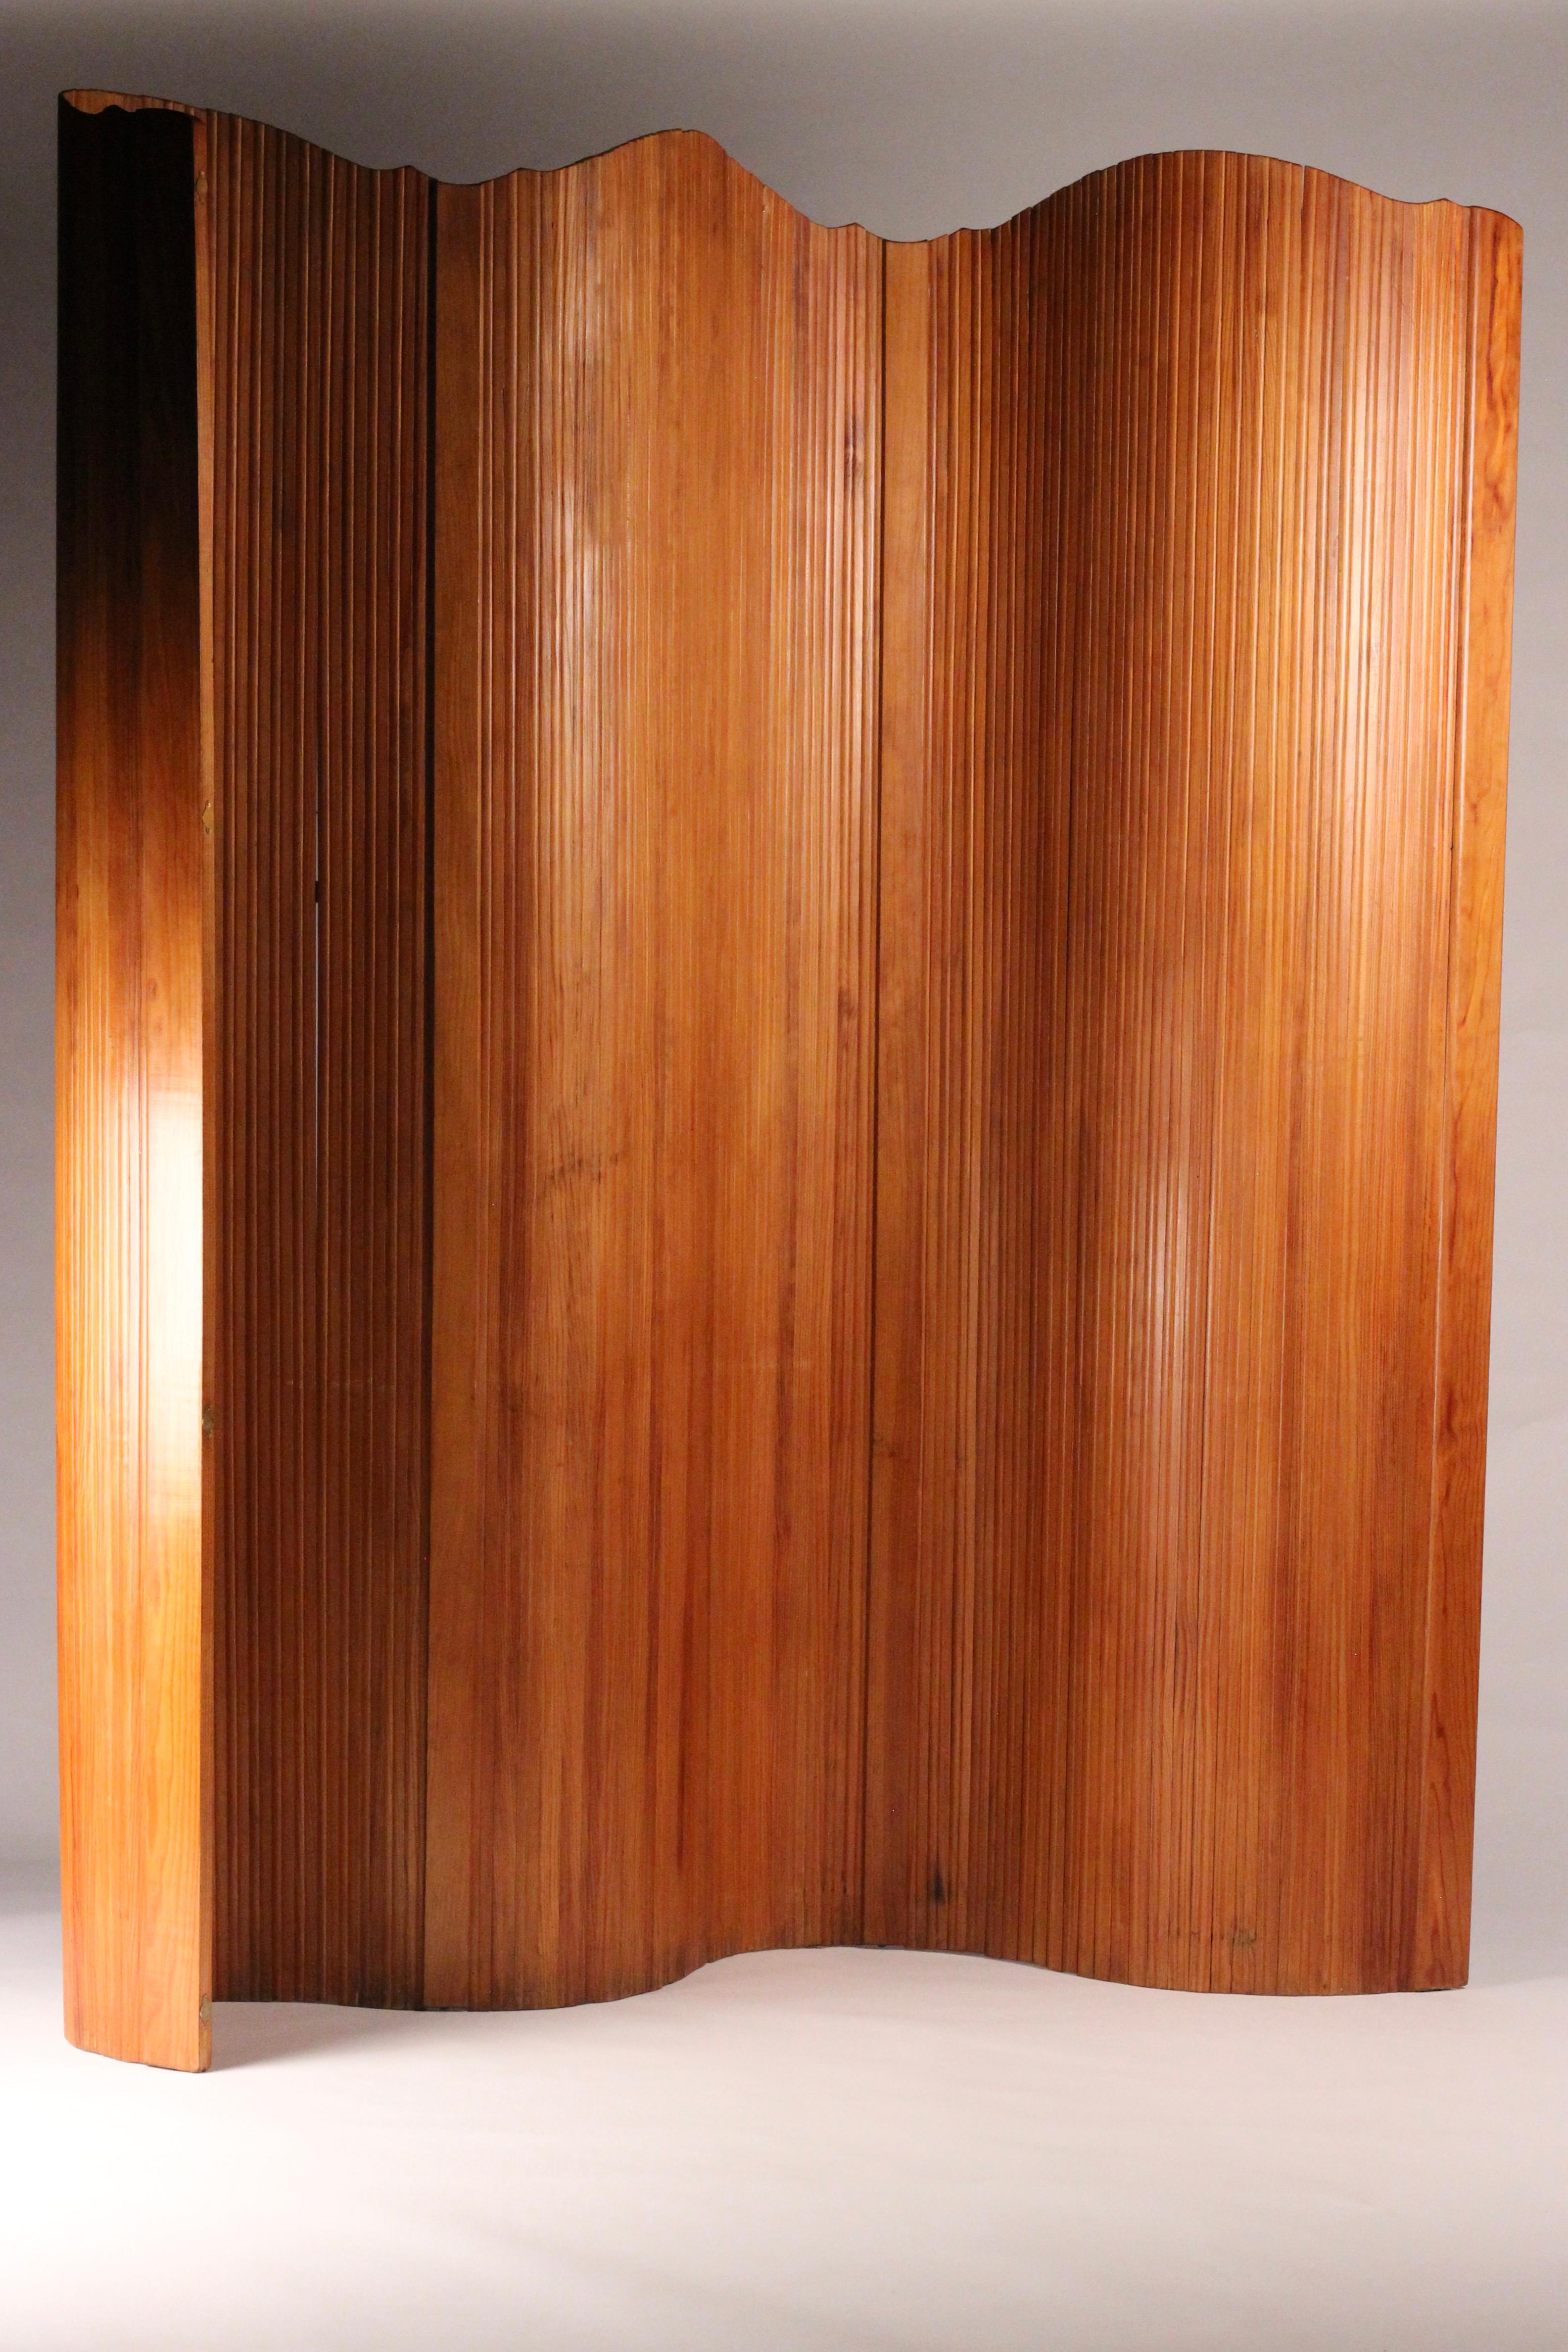 French Art Deco tambour screen room divider in Pine 1930’s attributed Baumman 1